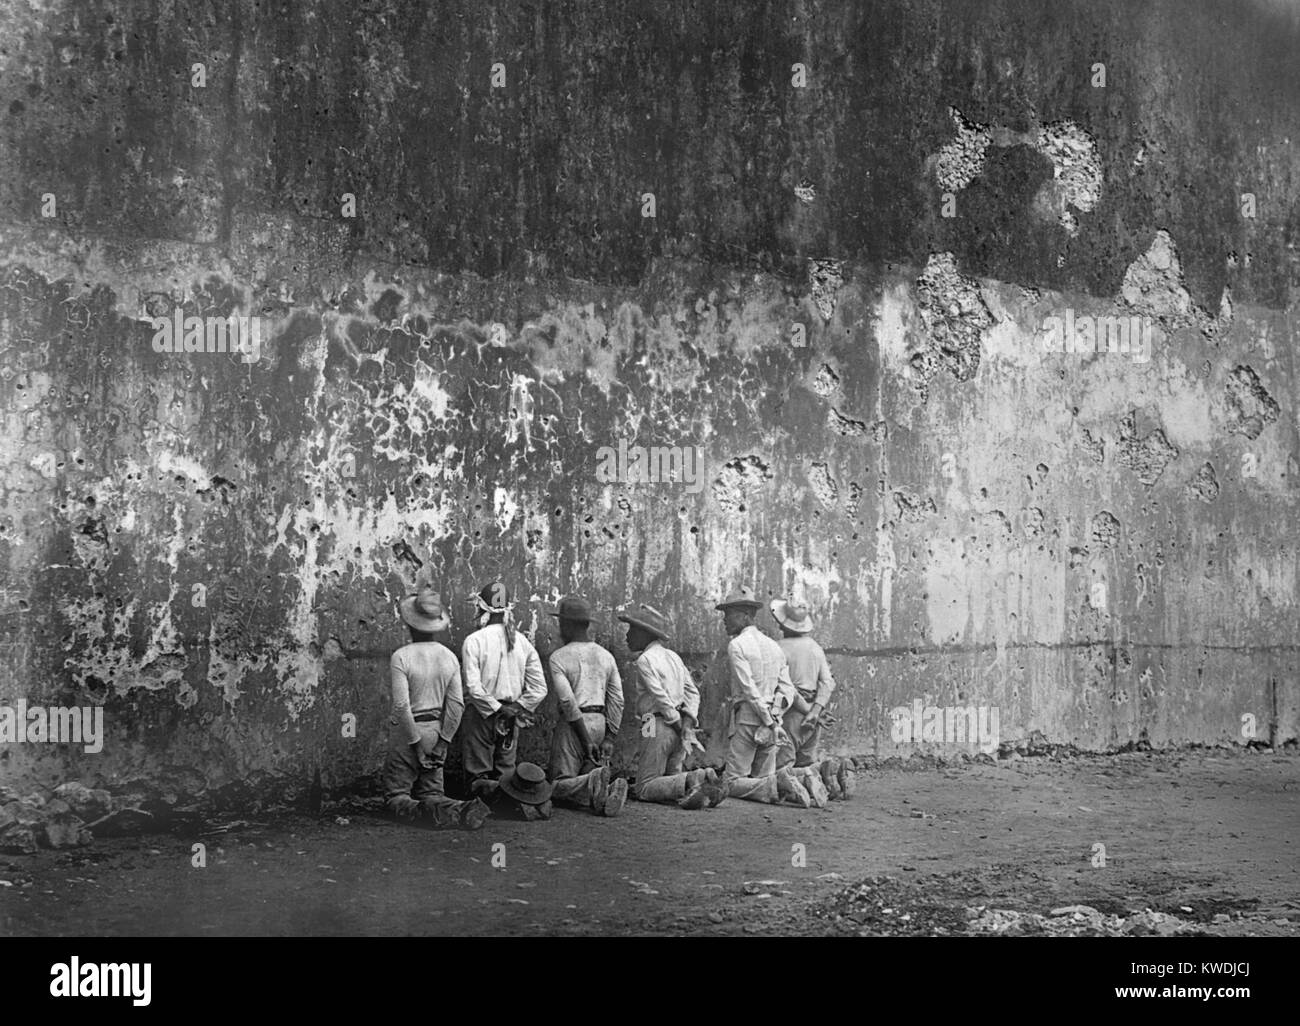 Execution scene at the arsenal in Santiago, Cuba. Photo taken by E.C. Rost of US Army, ca. 1899 (BSLOC 2017 10 5) Stock Photo